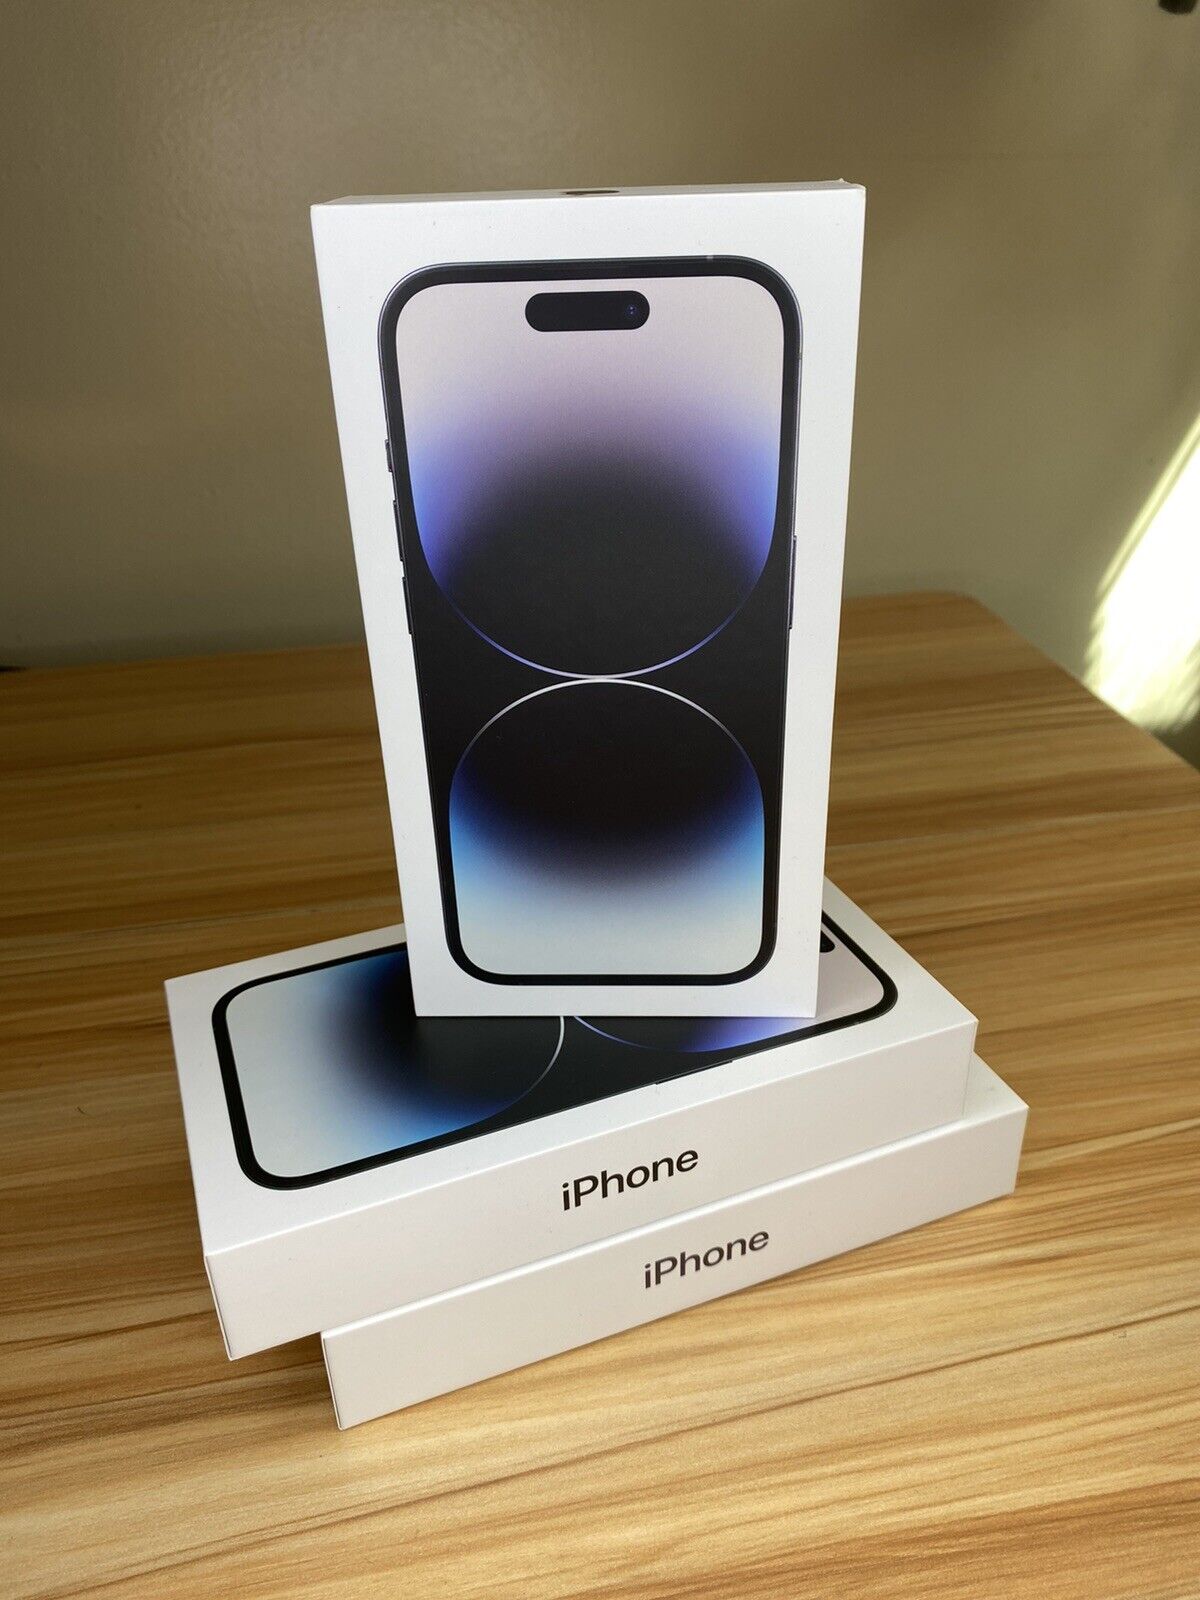 iPhone 14 Pro and 14 Pro Max 1TB Storage